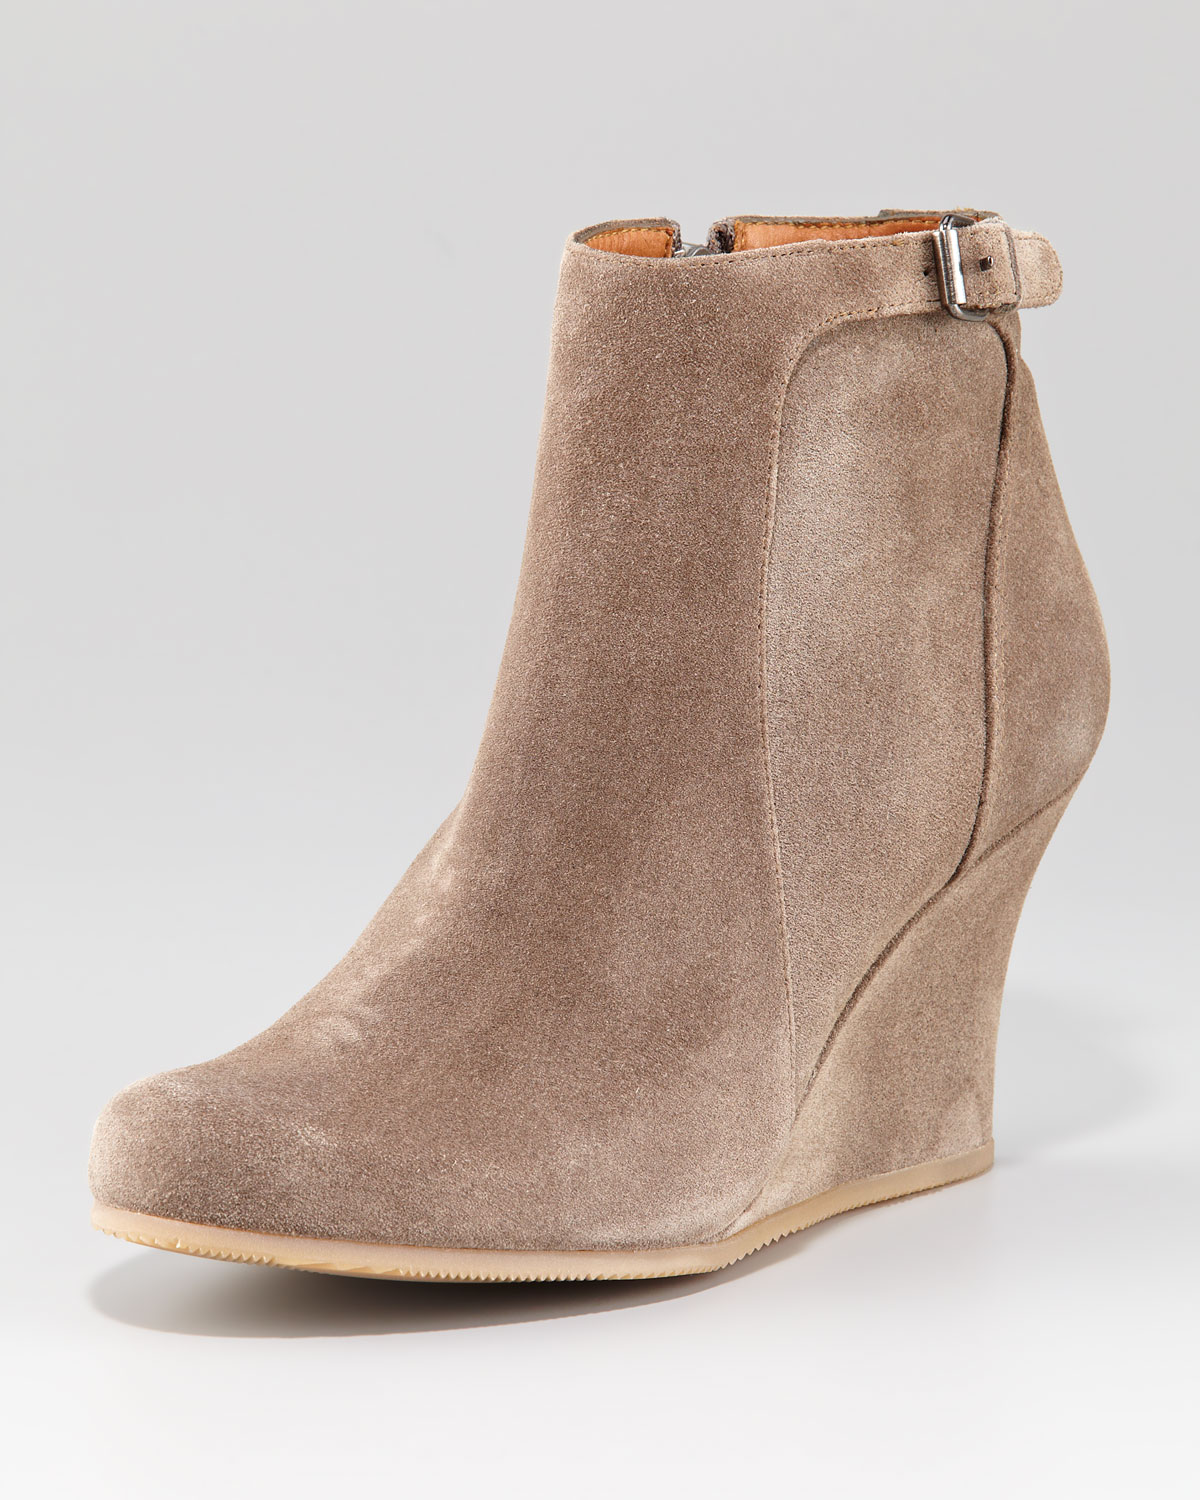 beige wedge ankle boots